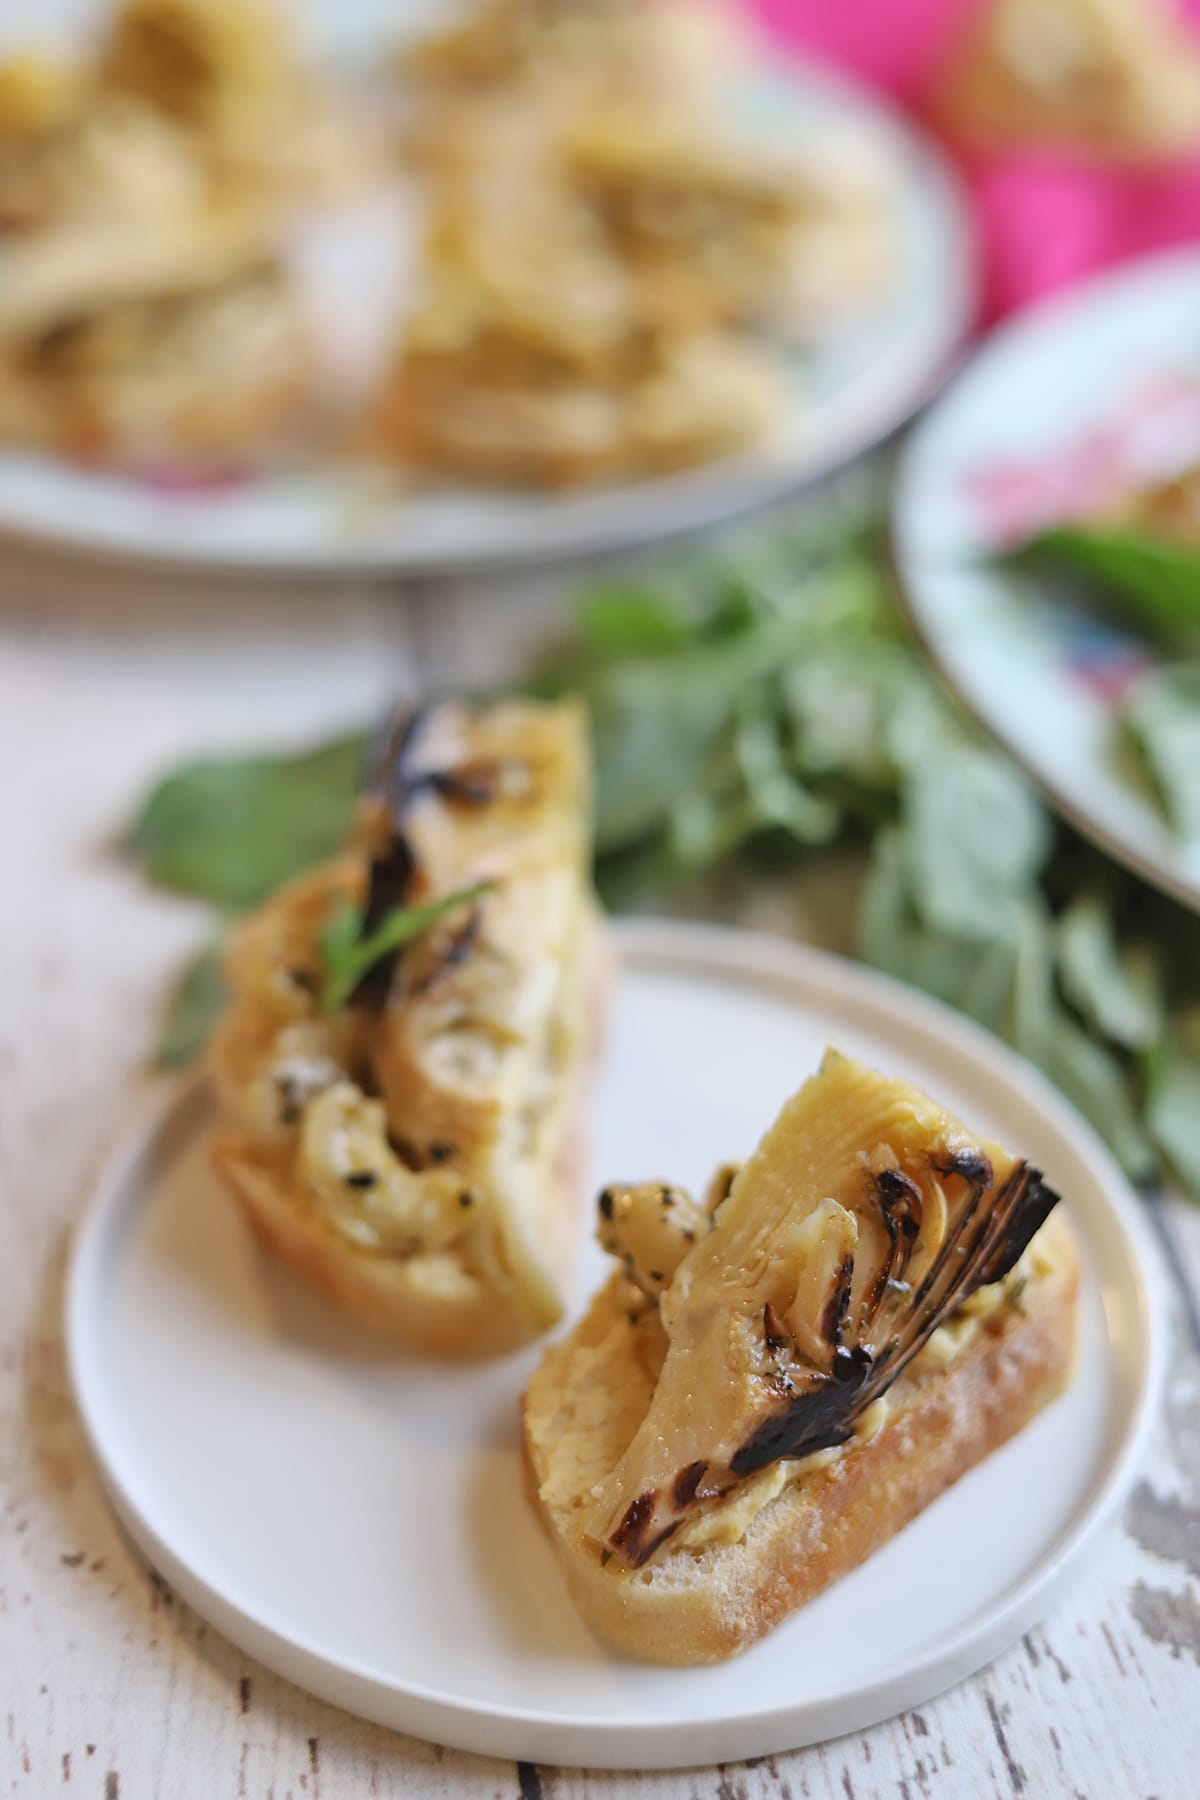 Toasted bread on plate with hummus, artichokes, and marinated cashews.